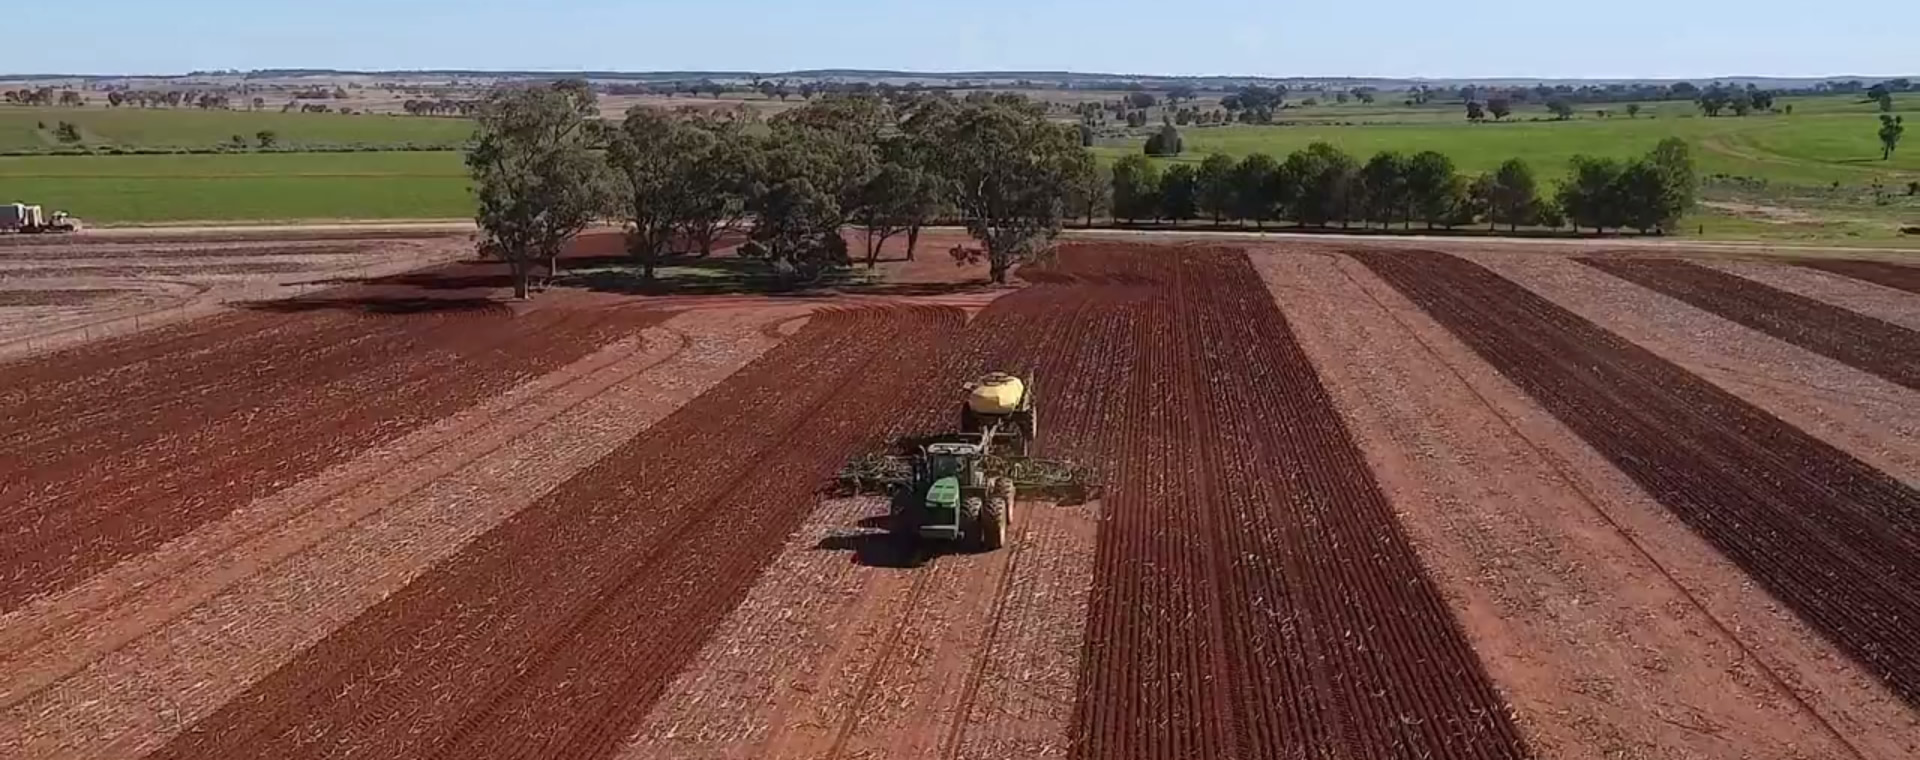 tractor working on farm